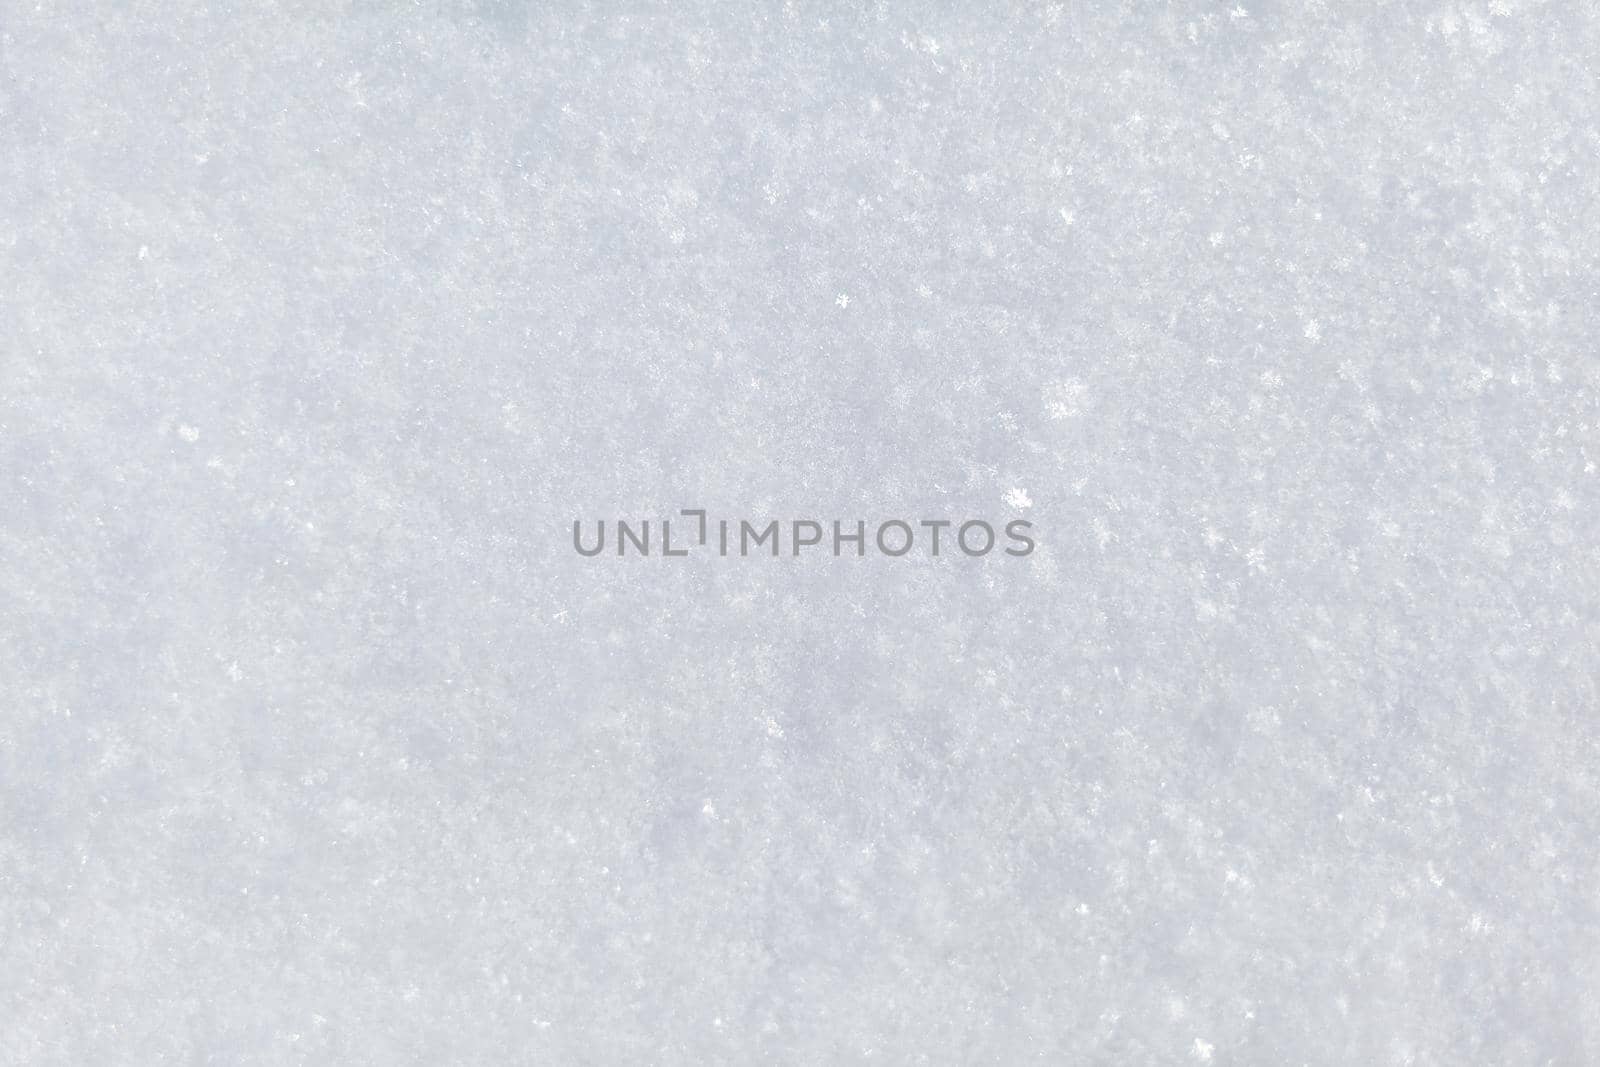 Clean, white snow close-up. Winter background. Snow surface. Fresh fluffy white snow texture.White snowflakes. High quality photo